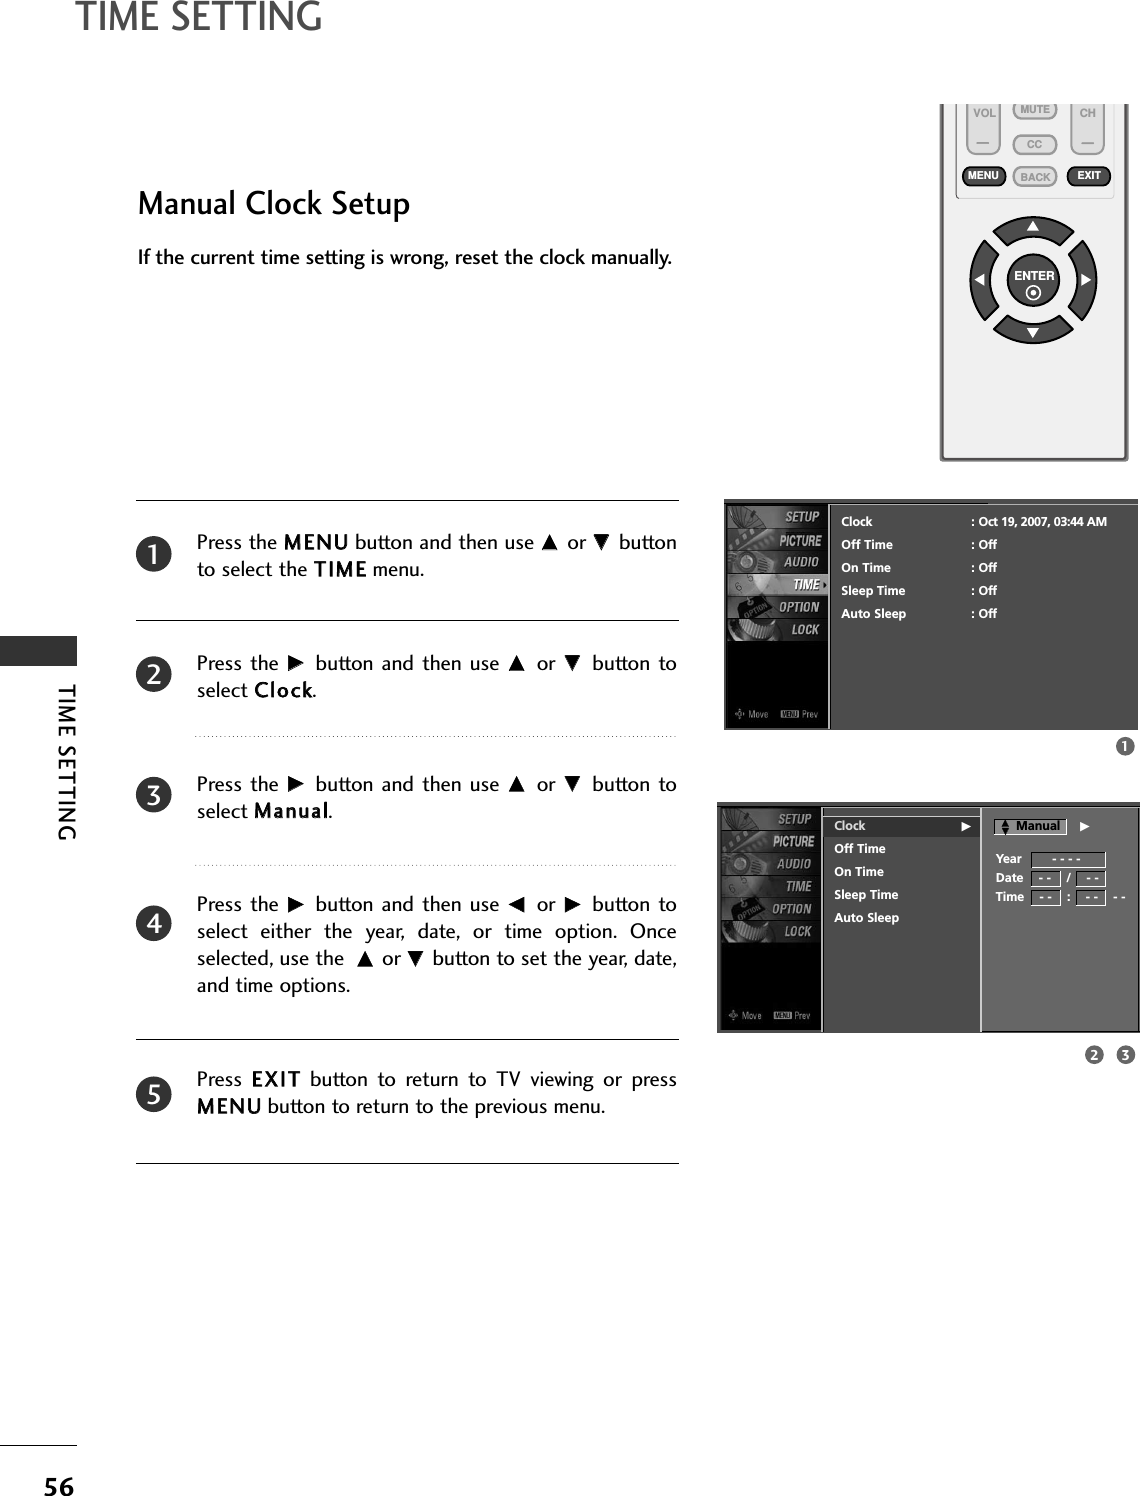 TIME SETTING56TIME SETTINGVOL CHENTERBACKMUTECCMENU EXITManual Clock SetupPress the MMEENNUUbutton and then use DD or EE buttonto select the TTIIMMEEmenu.Press the  GG button  and then use DD or  EE button toselect CClloocckk. Press the  GG button  and then use DD or  EE button toselect MMaannuuaall.Press the  GG button  and then use FF or  GG button toselect  either  the  year,  date,  or  time  option.  Onceselected, use the  DD or EE button to set the year, date,and time options.Press  EEXXIITTbutton  to  return  to  TV  viewing  or  pressMMEENNUUbutton to return to the previous menu.If the current time setting is wrong, reset the clock manually.23451132Clock GOff TimeOn TimeSleep TimeAuto SleepClock : Oct 19, 2007, 03:44 AMOff Time : OffOn Time : OffSleep Time : OffAuto Sleep : OffYear        - - - -Date    - -    /    - -Time    - -    :    - -    - -ManualDDEEG